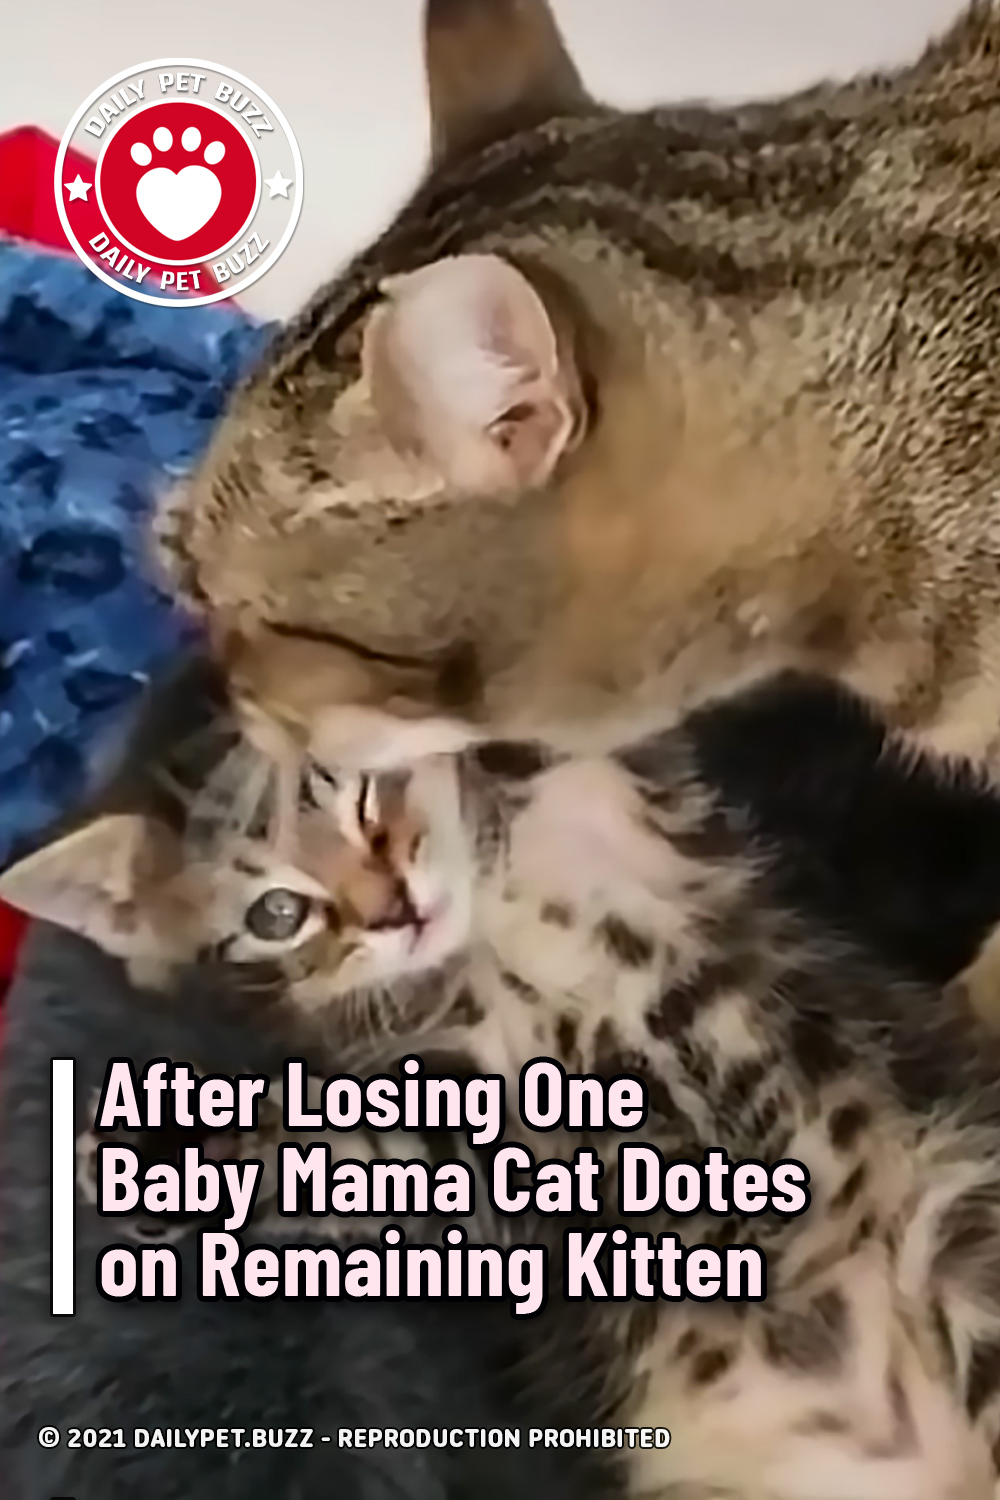 After Losing One Baby Mama Cat Dotes on Remaining Kitten